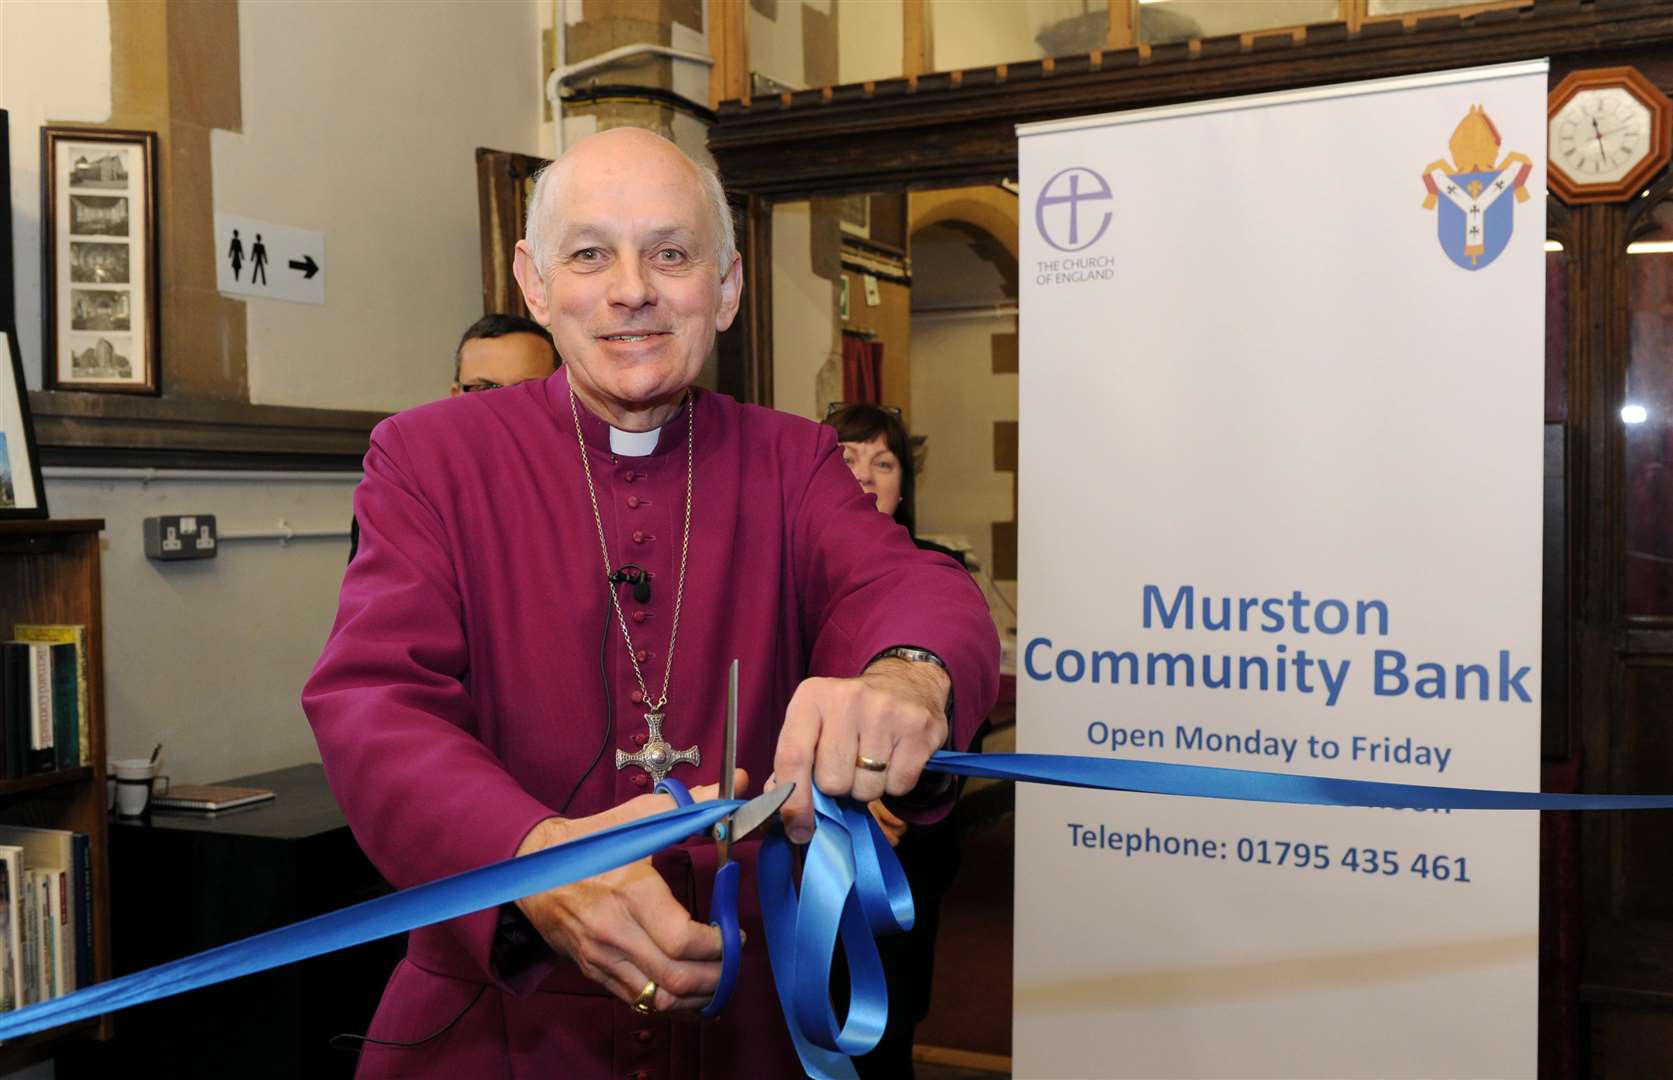 The Bishop of Dover, the Rt Rev Trevor Willmott, opened the first church-based branch of the Kent Savers Credit Union in Murston in 2014